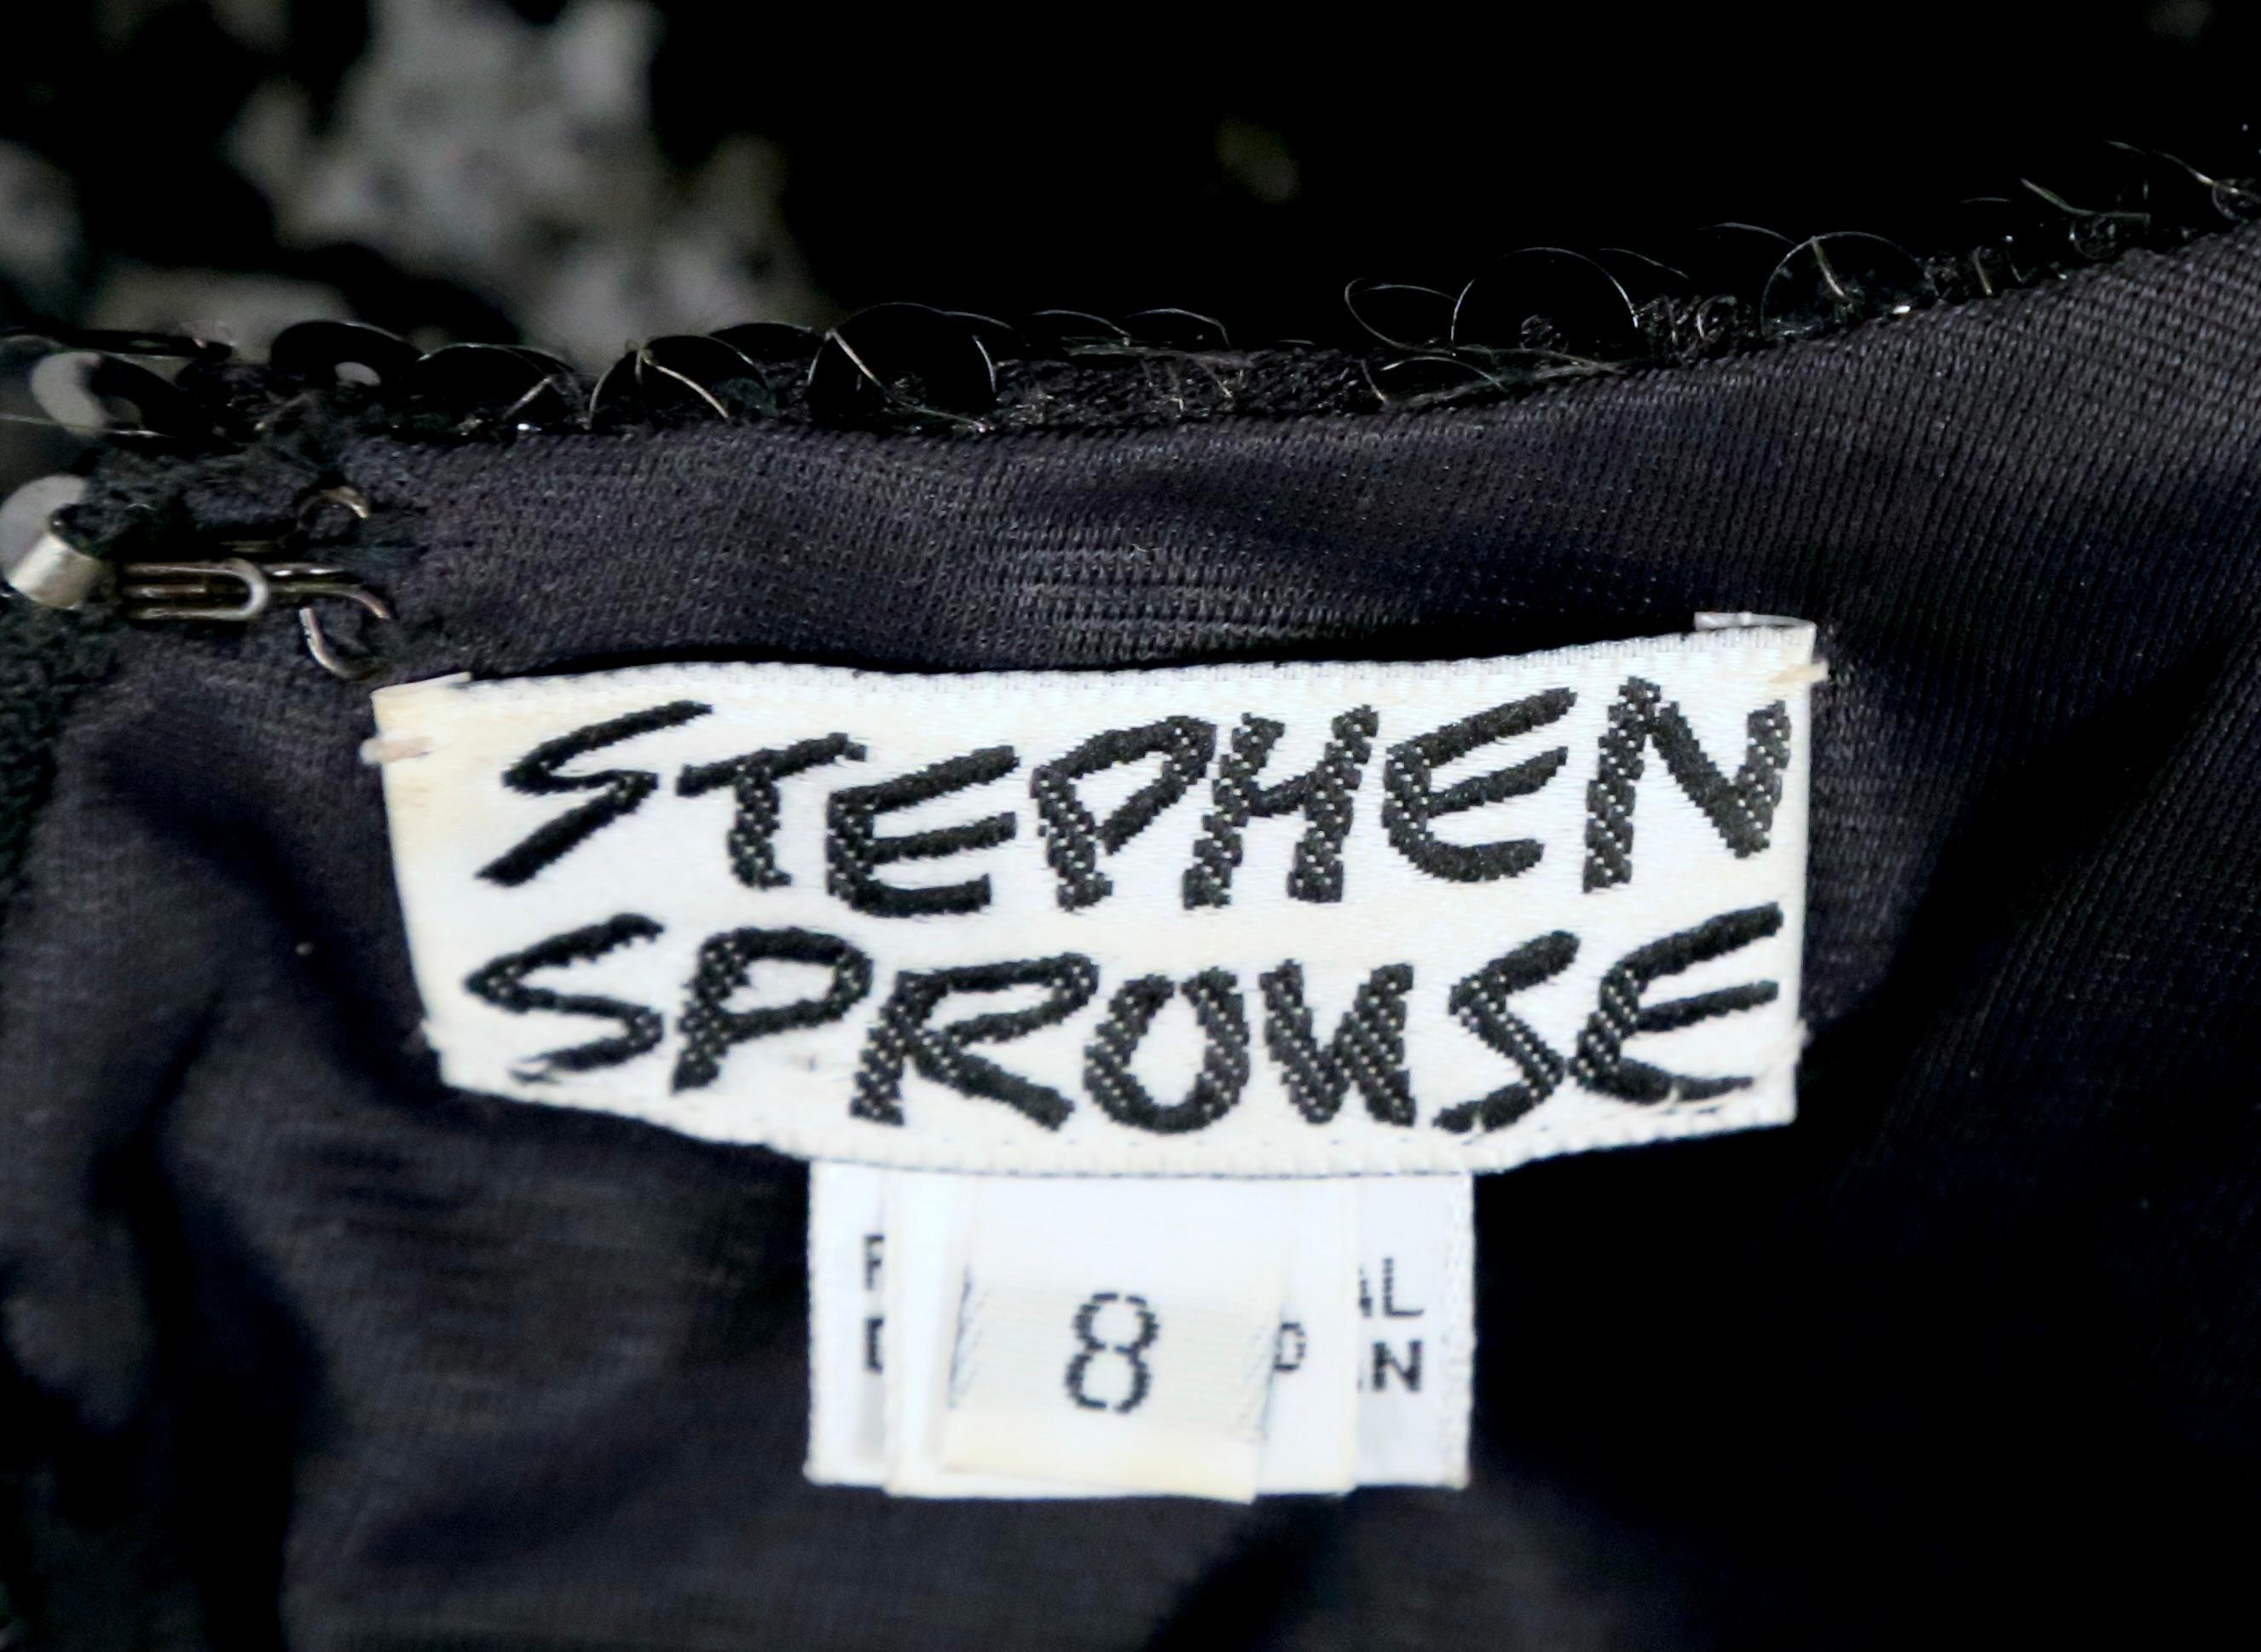 1988 STEPHEN SPROUSE black sequined dress For Sale 3